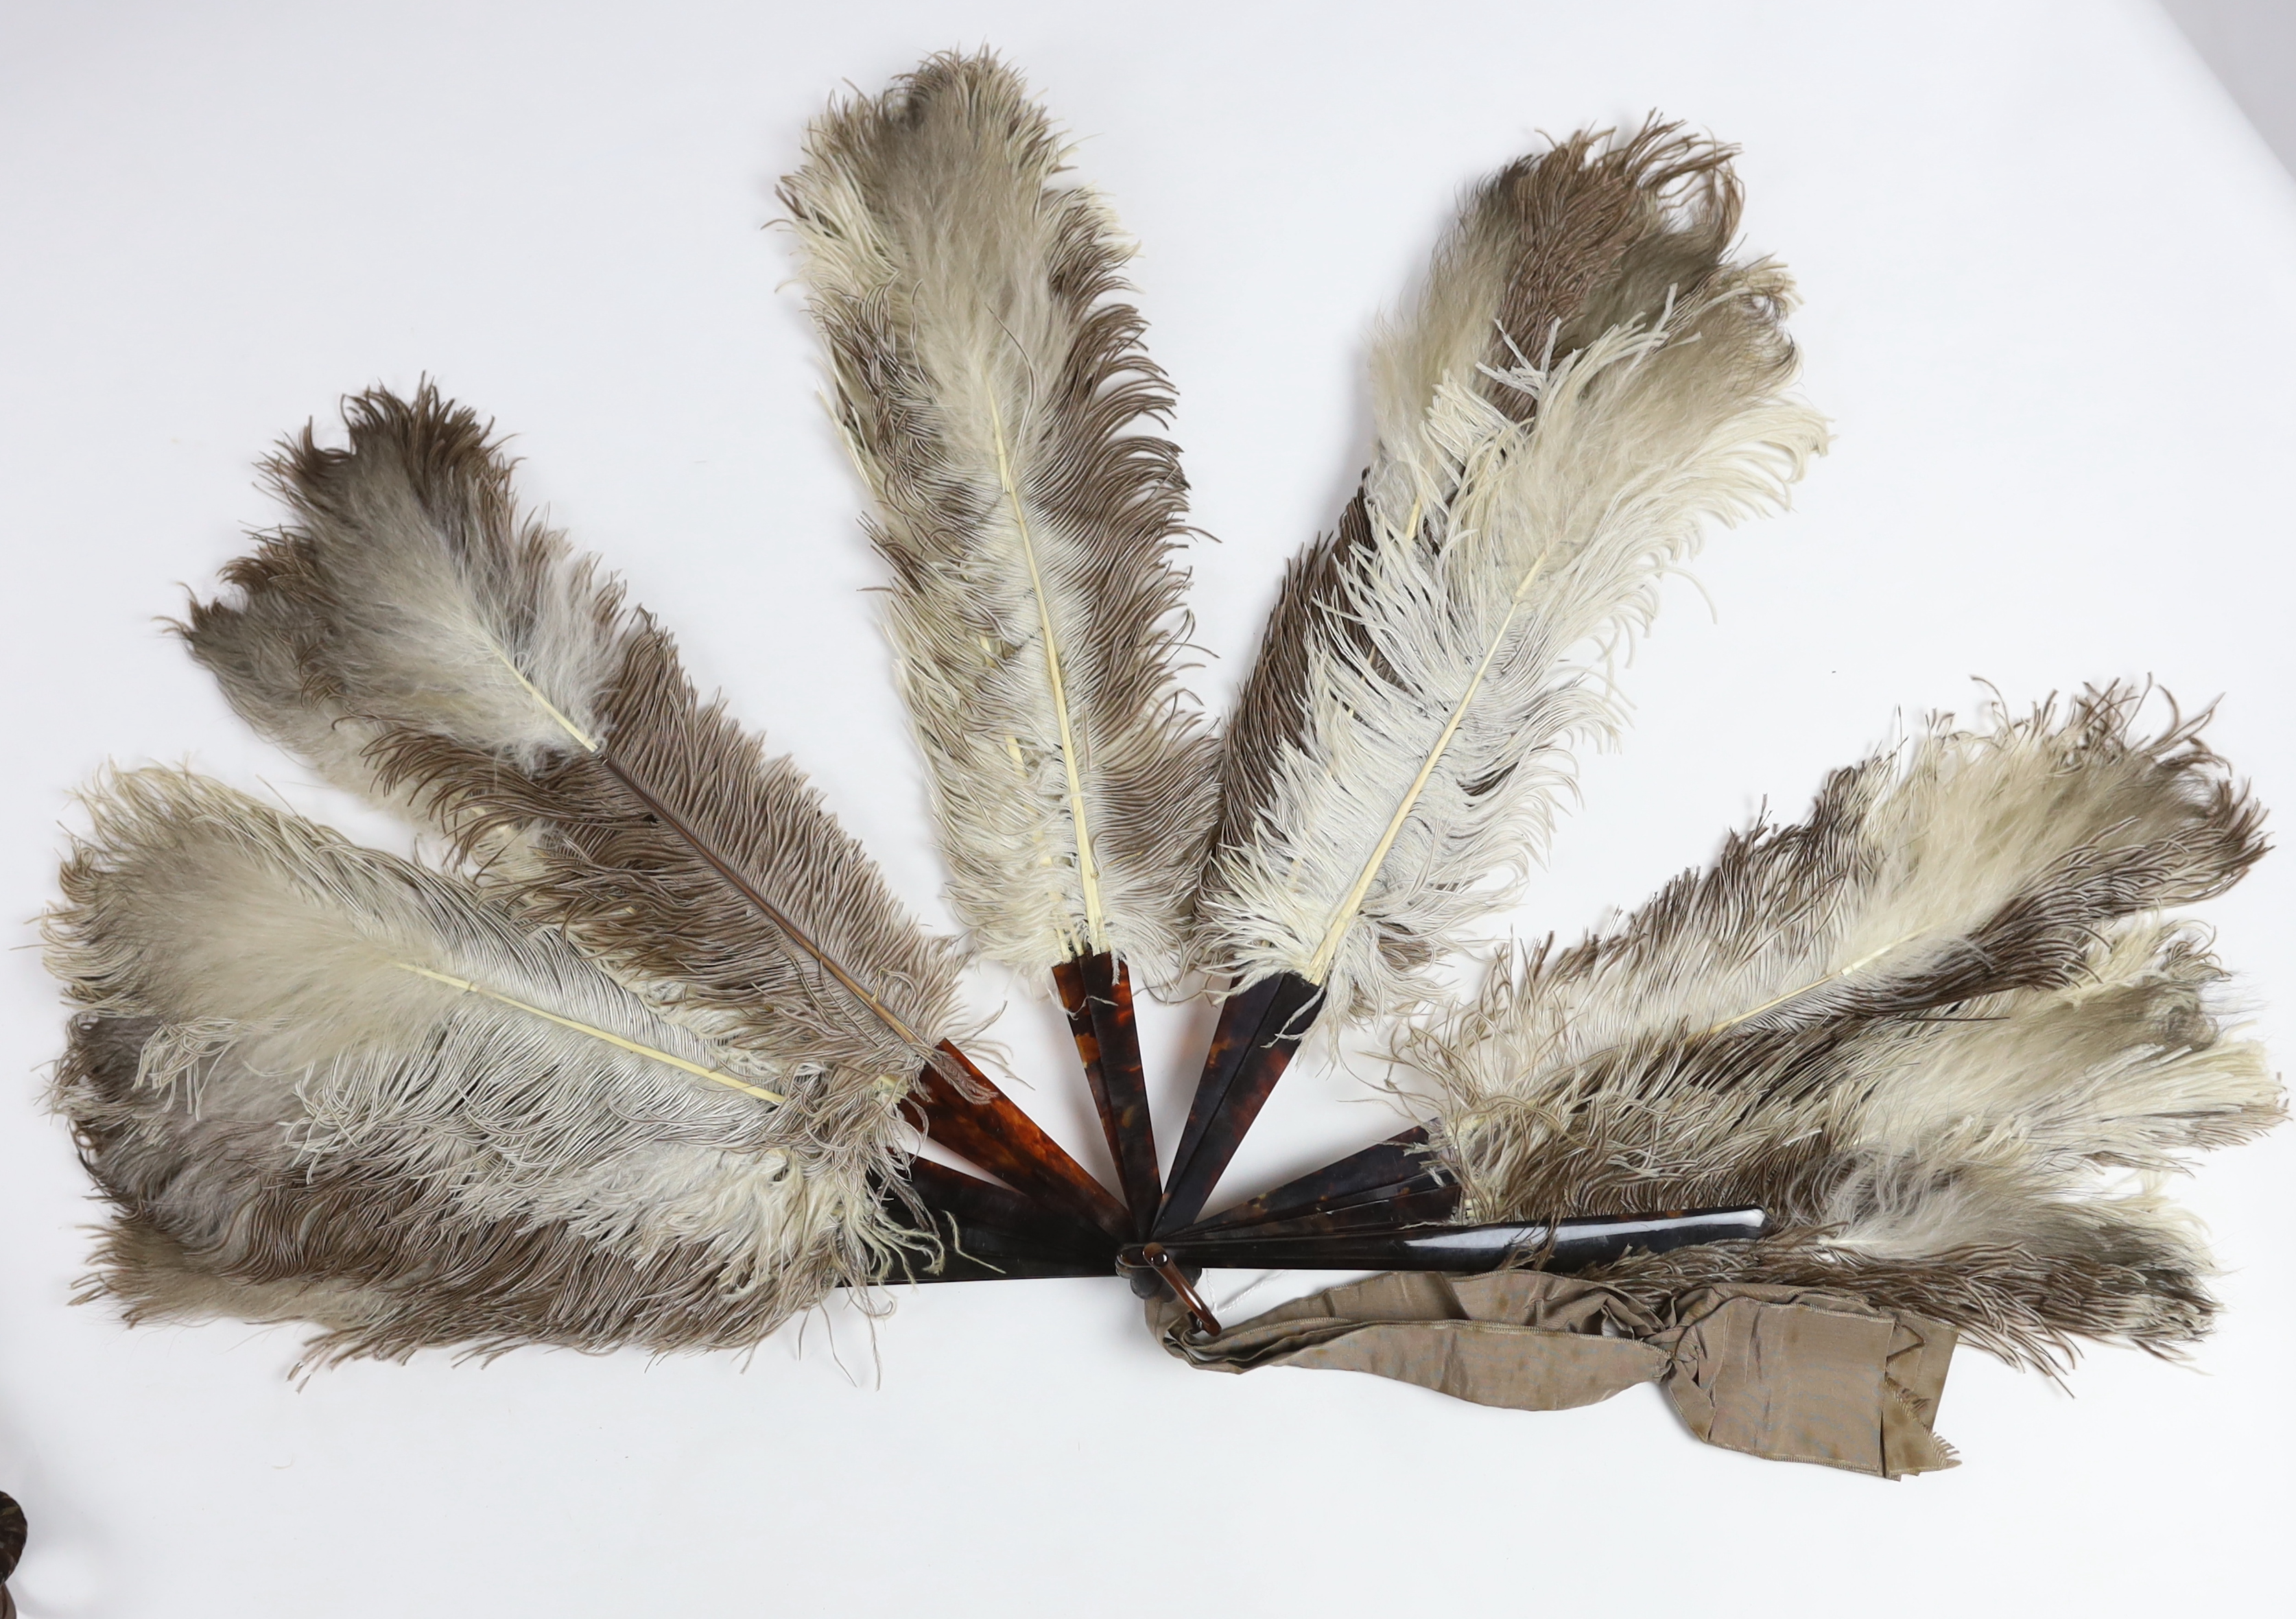 Two early 20th century brown and cream Ostrich feather fans, with tortoiseshell guards, one large fan, the other smaller